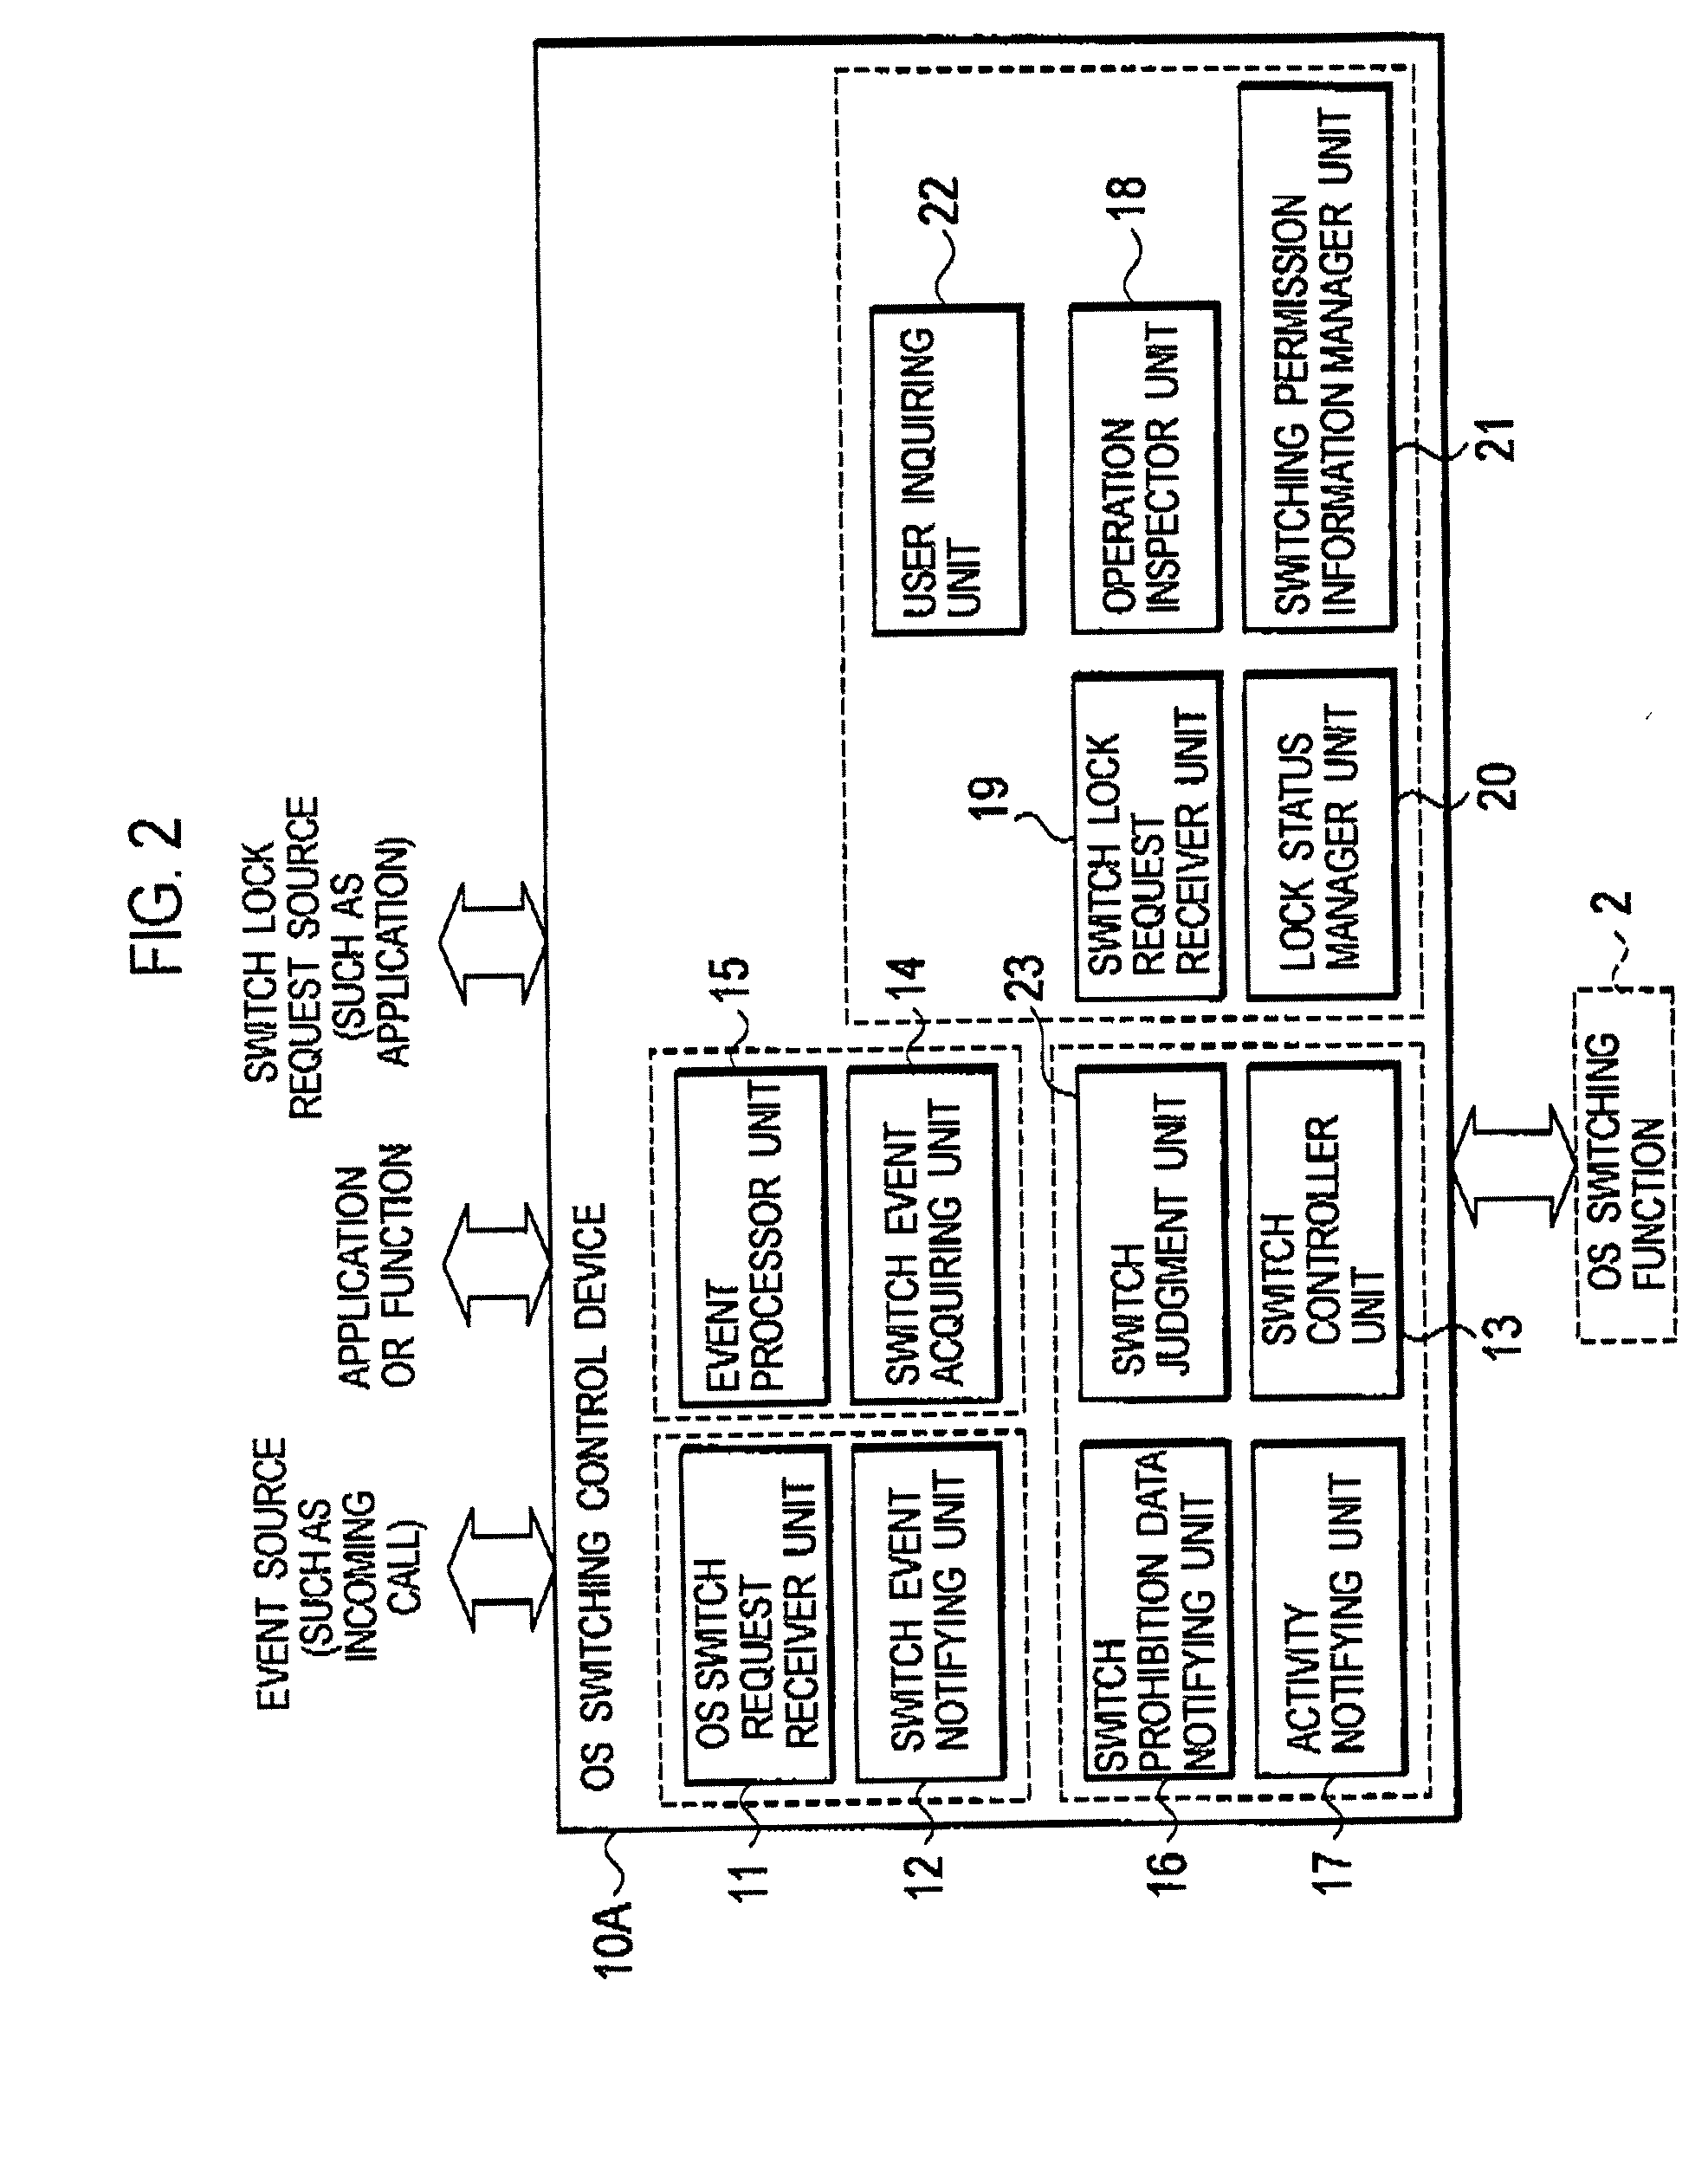 Operating system switching control device and computer system